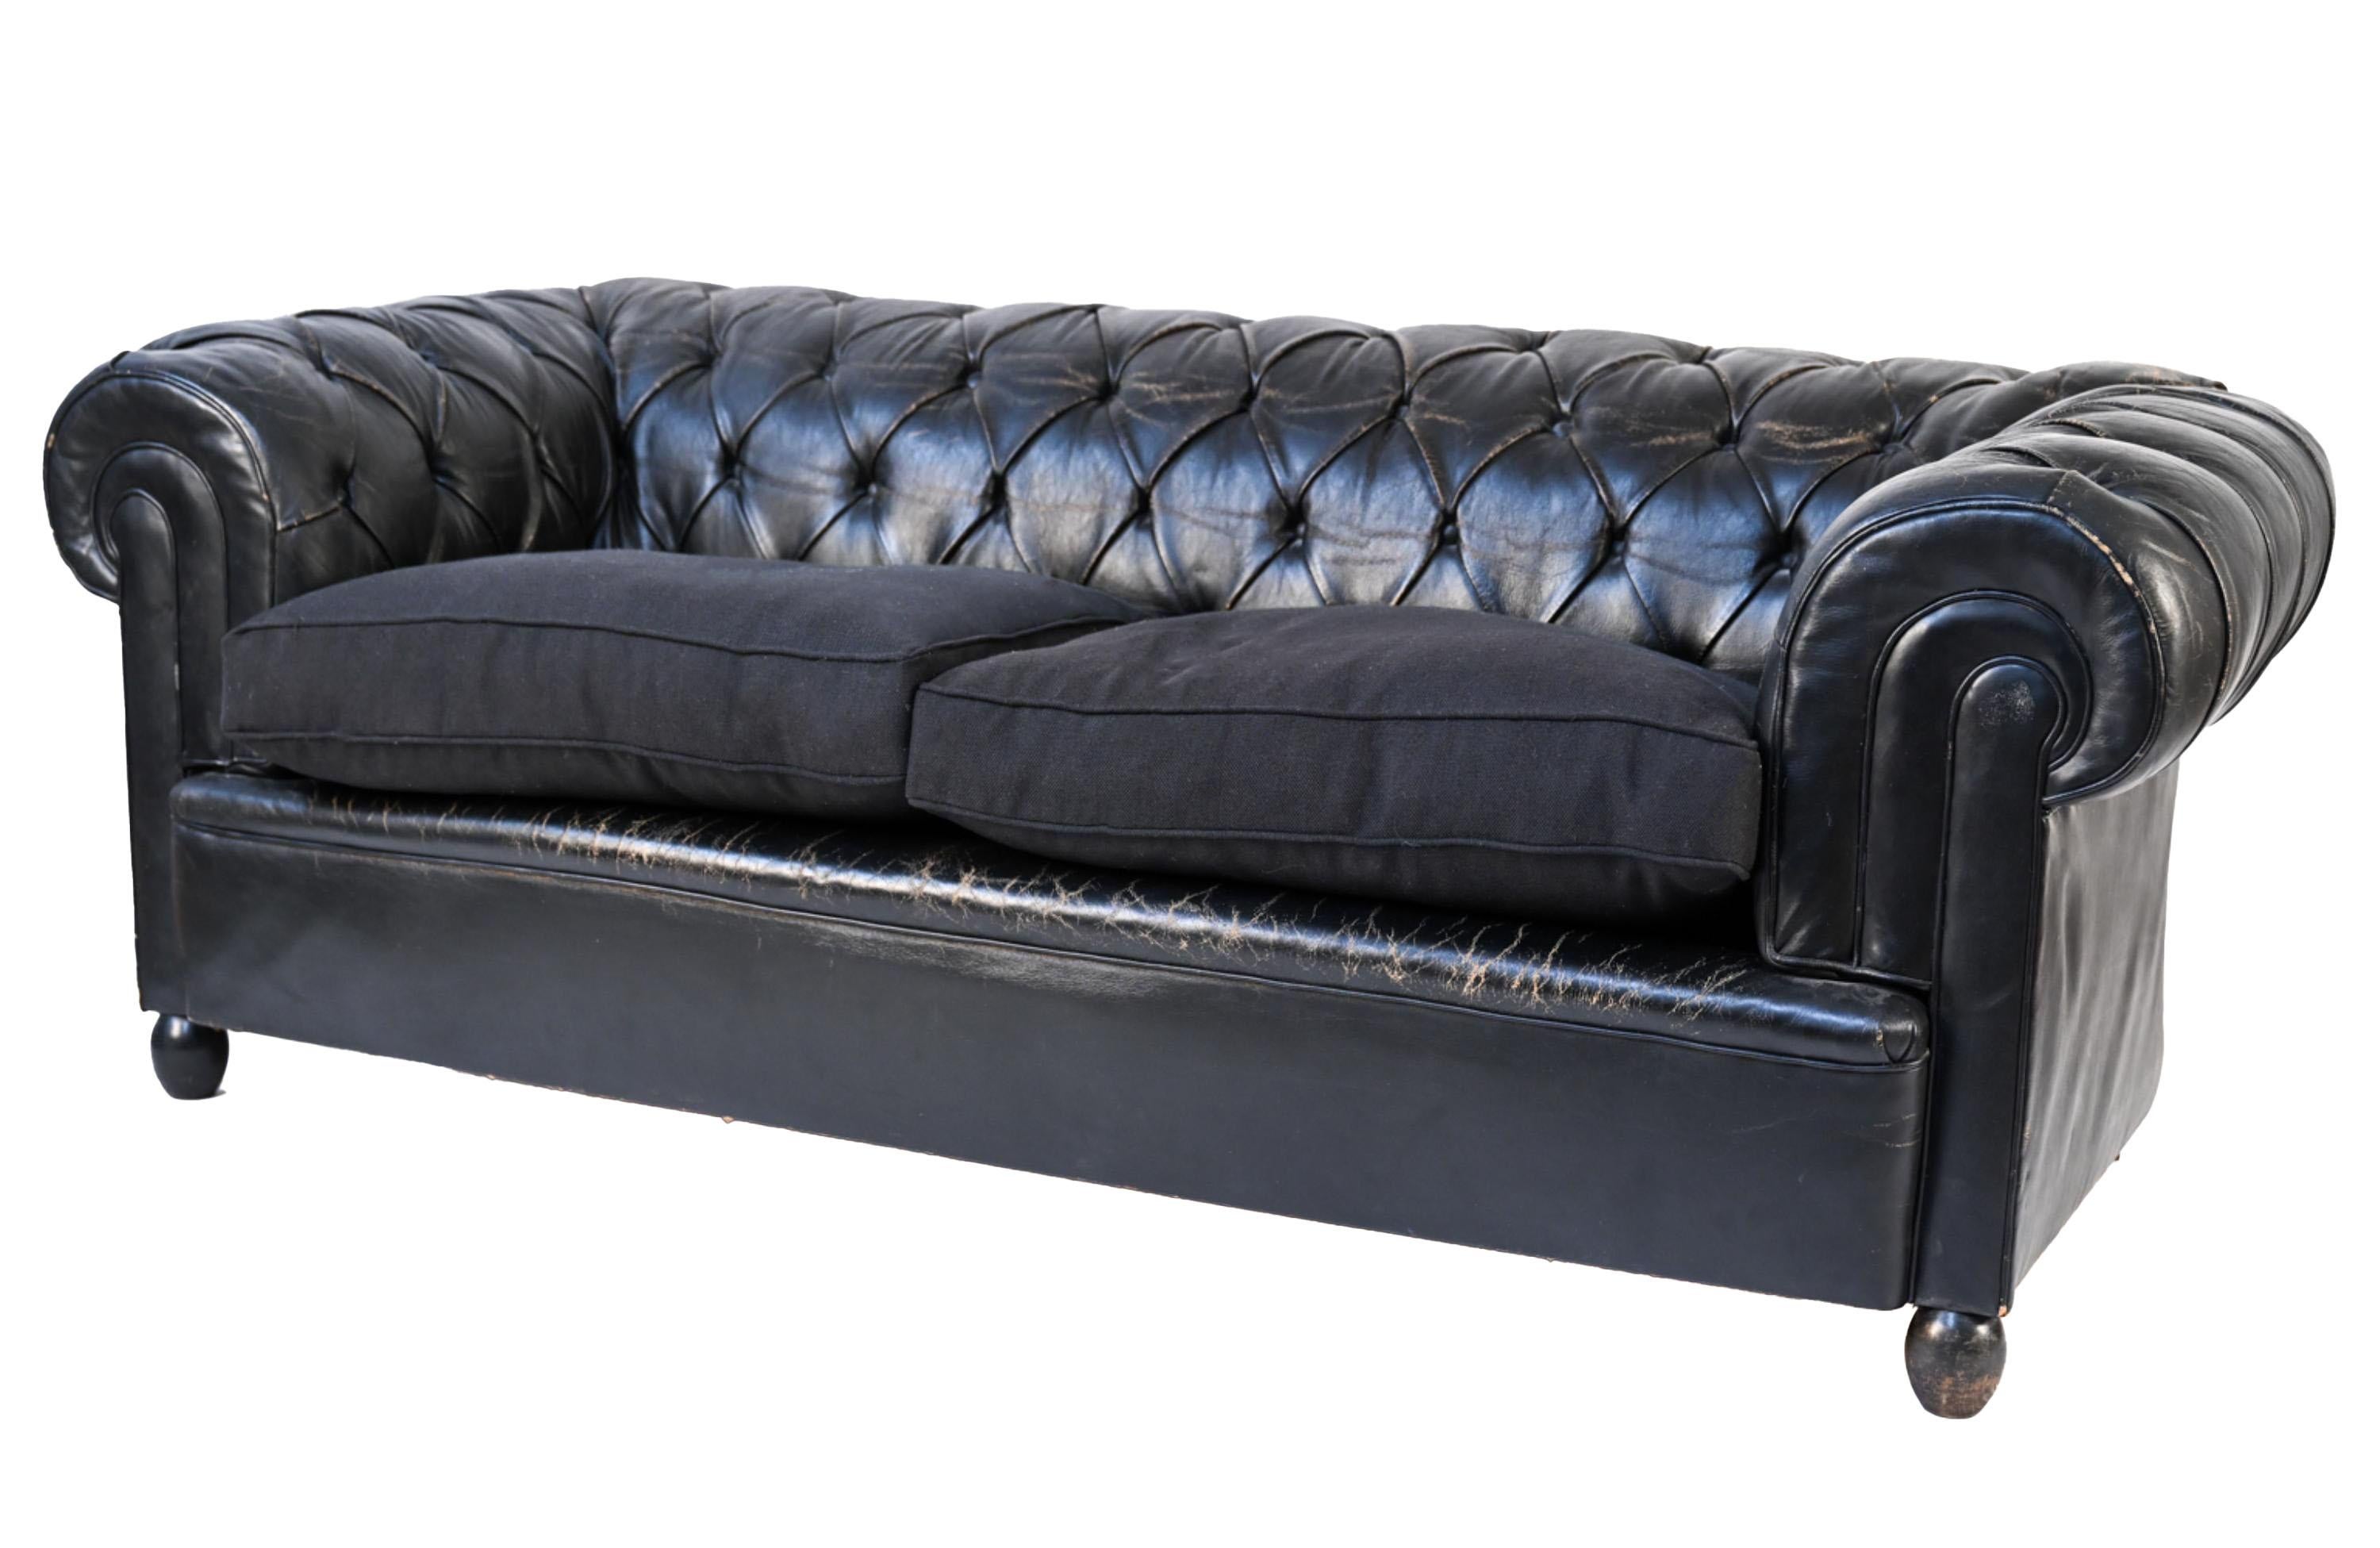 American Vintage Tufted Leather Chesterfield Sofas, a Pair